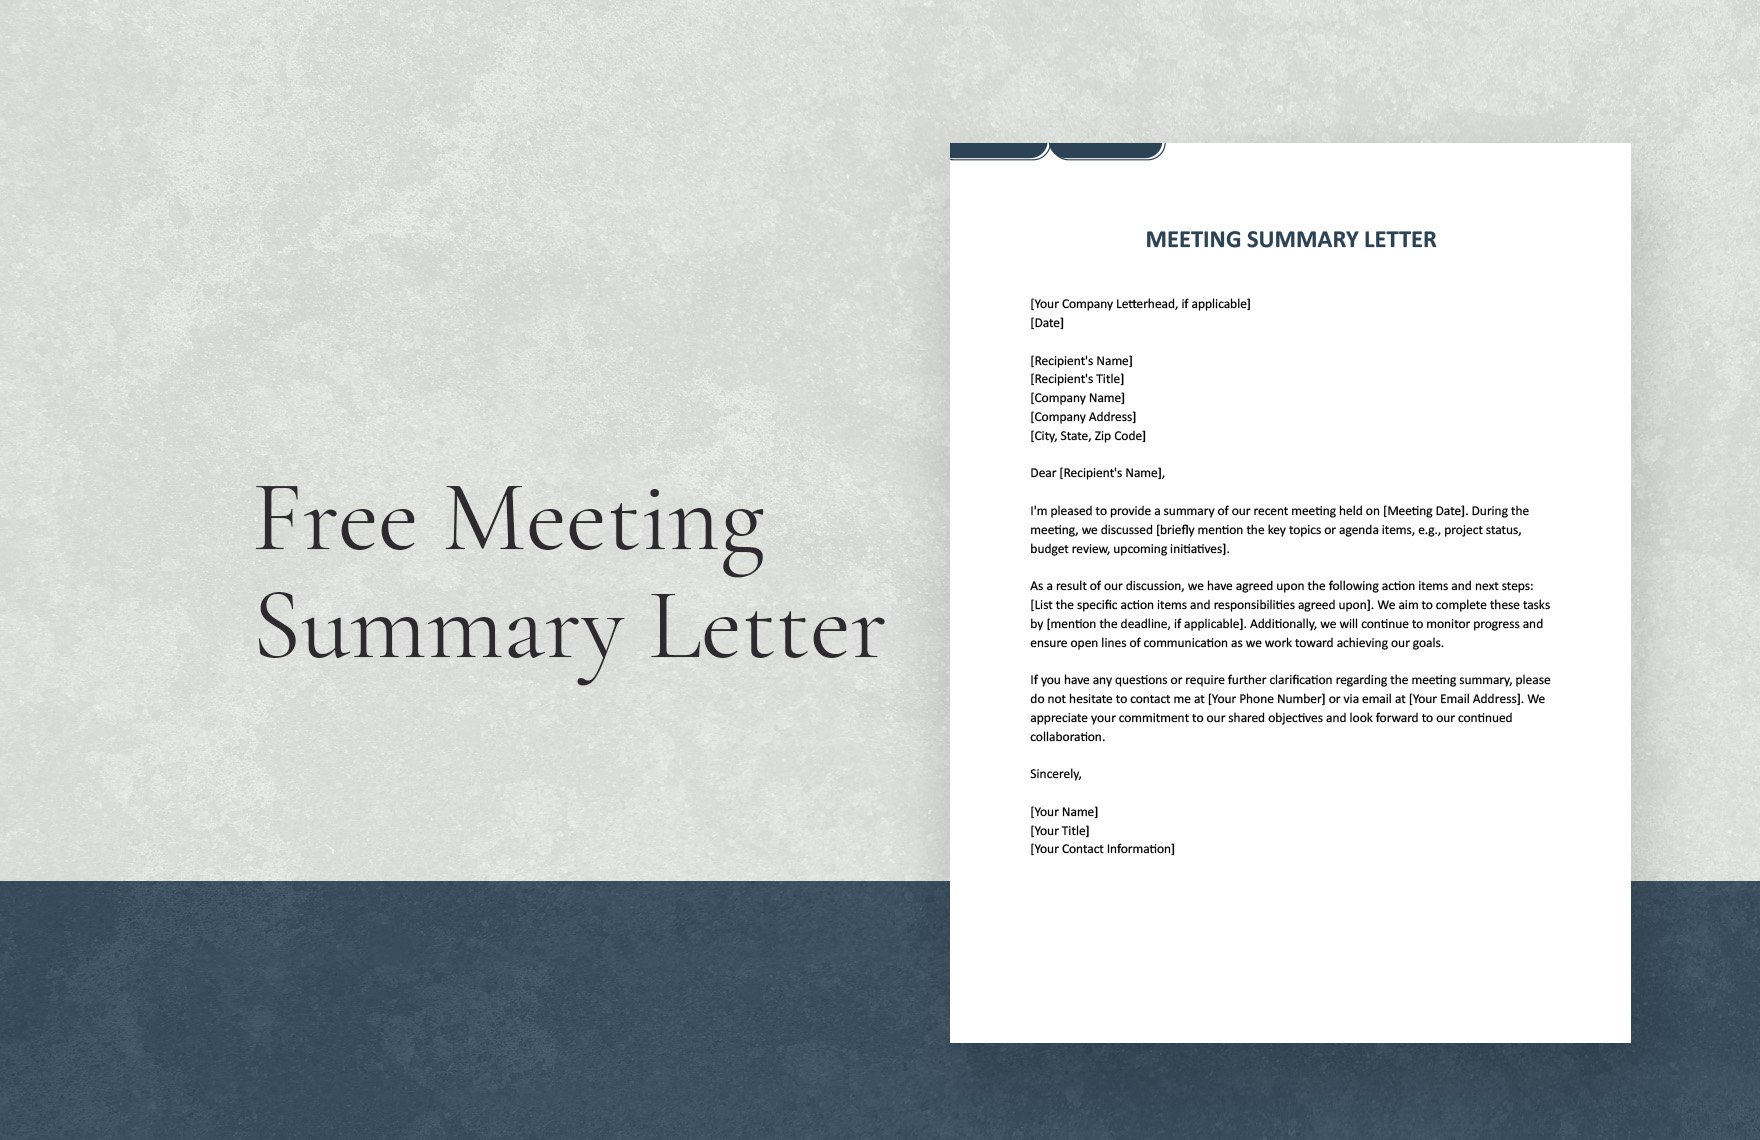 Free Meeting Summary Letter in Word, Google Docs